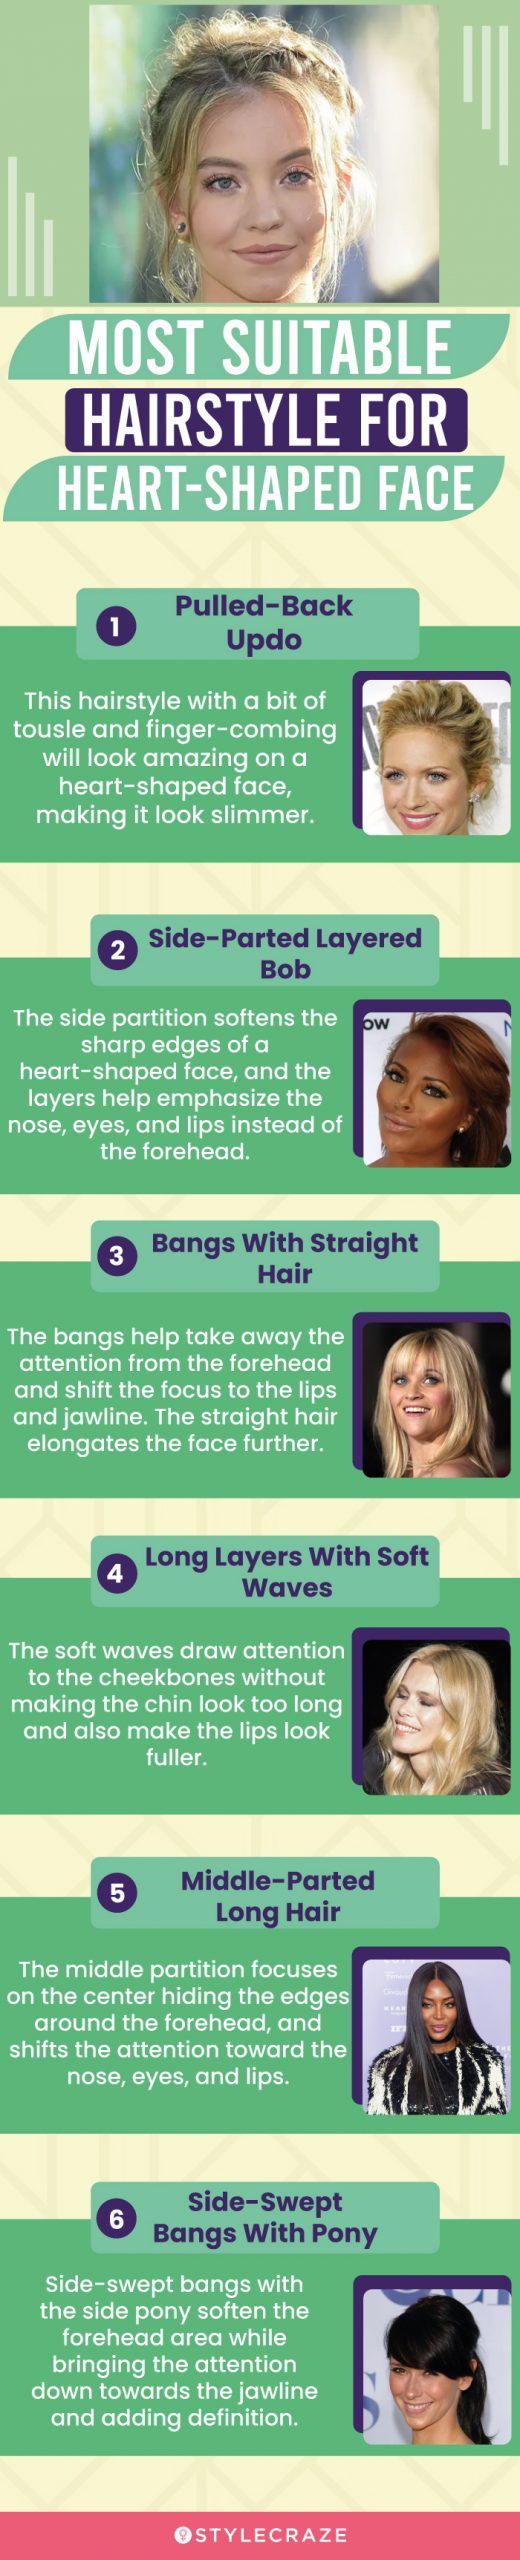 35 Flattering Hairstyles For Heart-shaped Face You Should Try Out